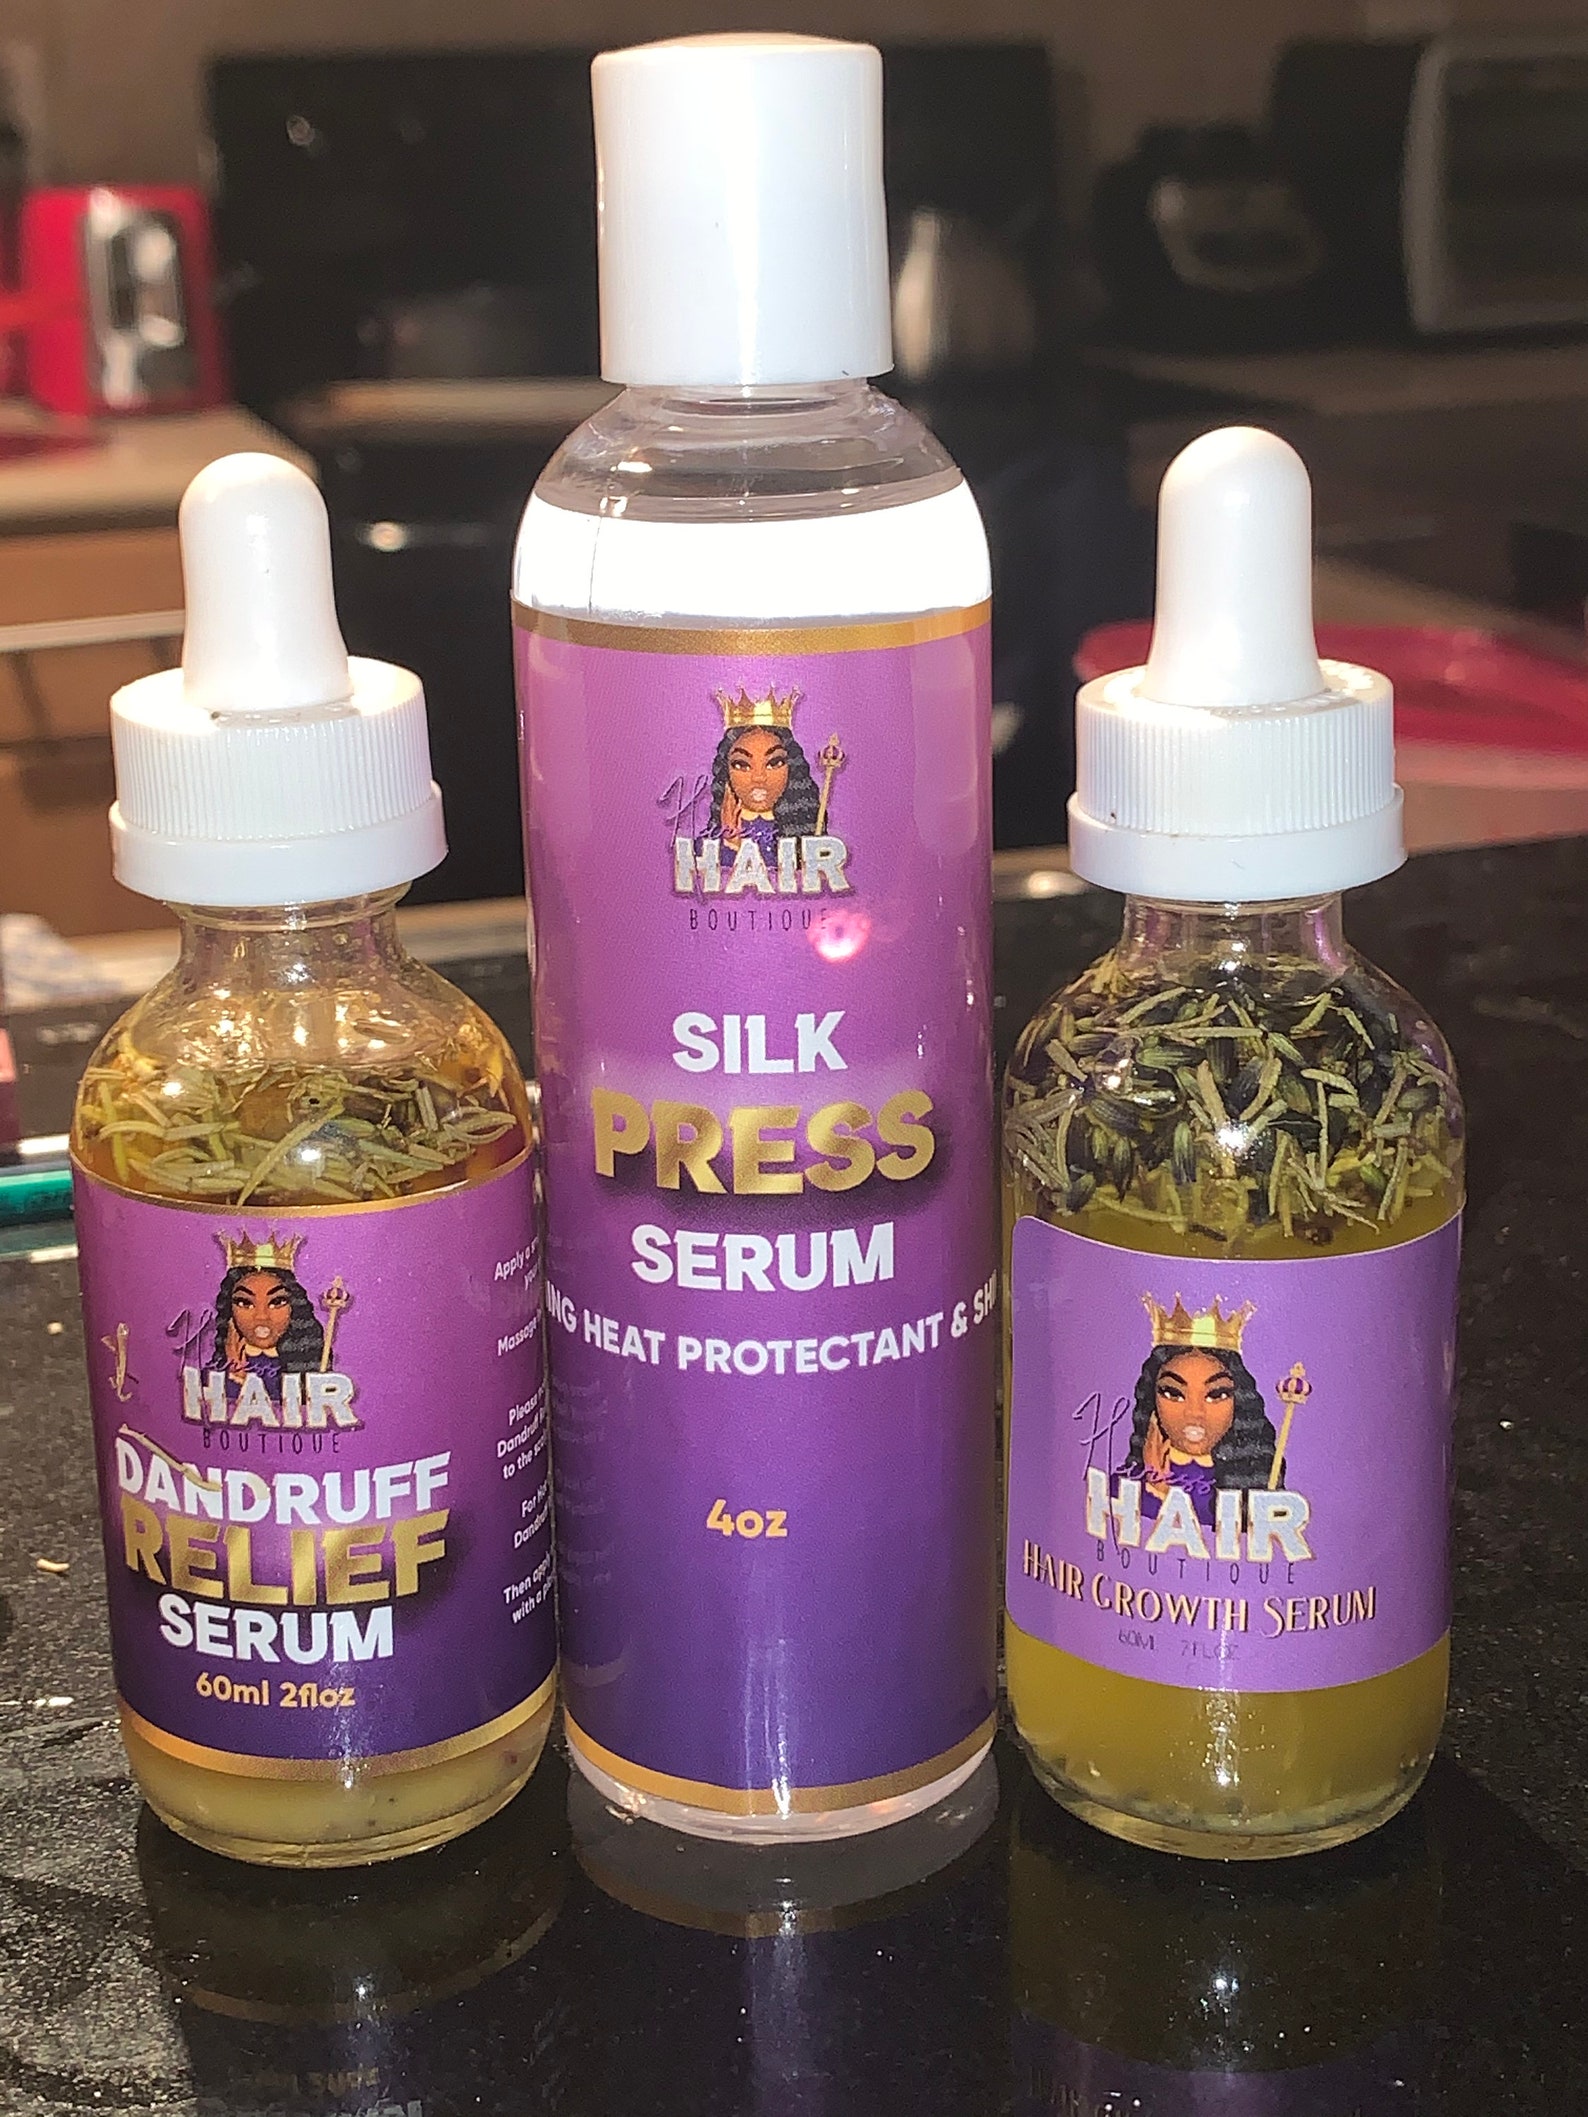 Wholesale hair products | Etsy